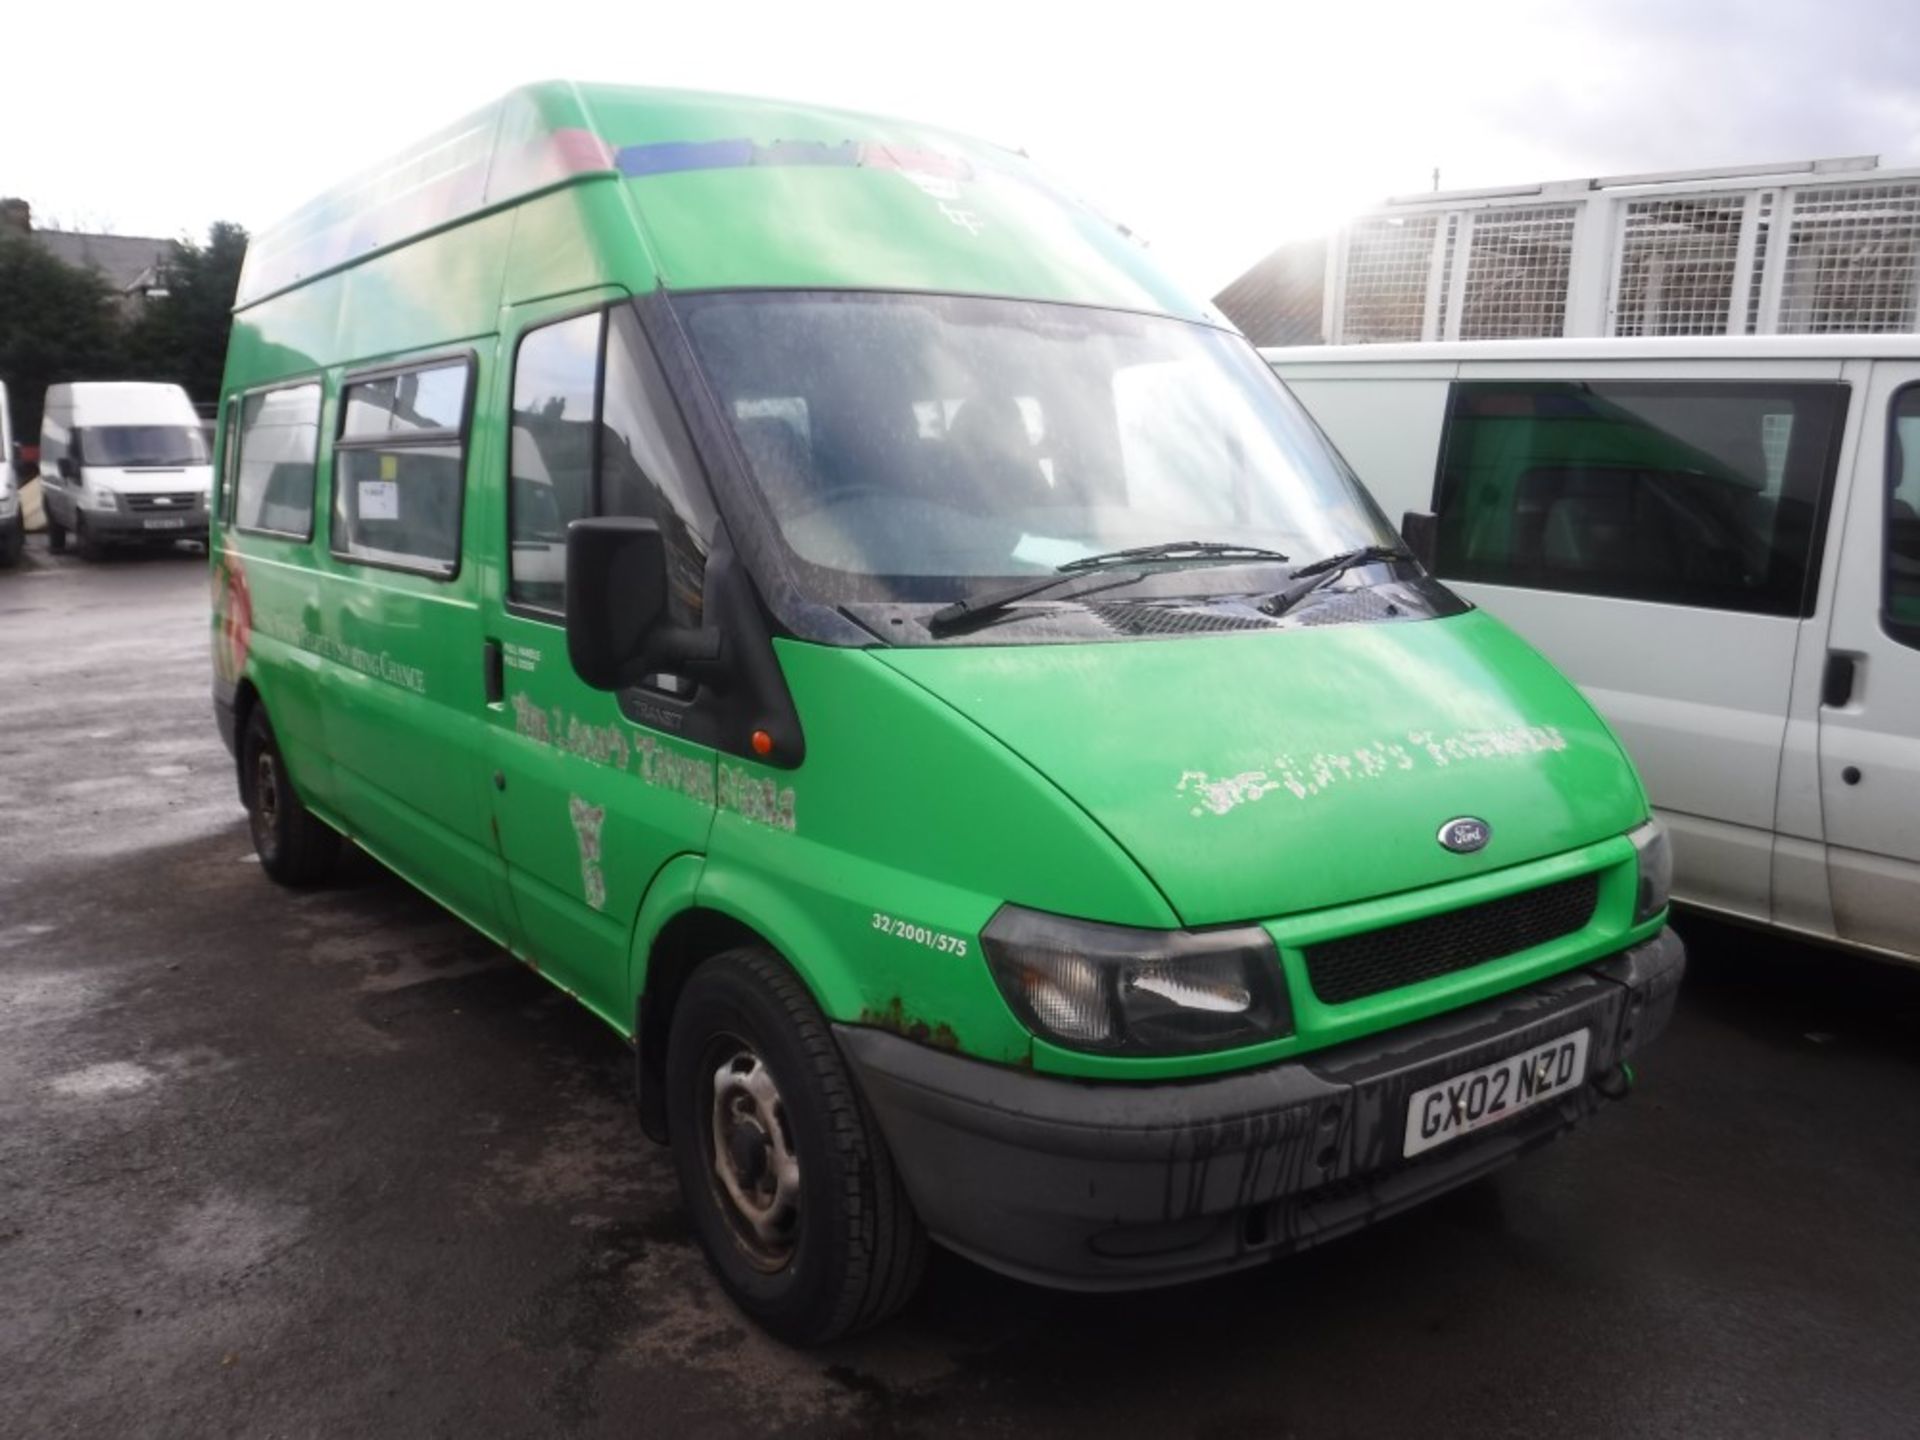 02 reg FORD TRANSIT 350 LWB DISABLED BUS WITH LIFT, 1ST REG 03/02, 216498M WARRANTED, V5 HERE, 1